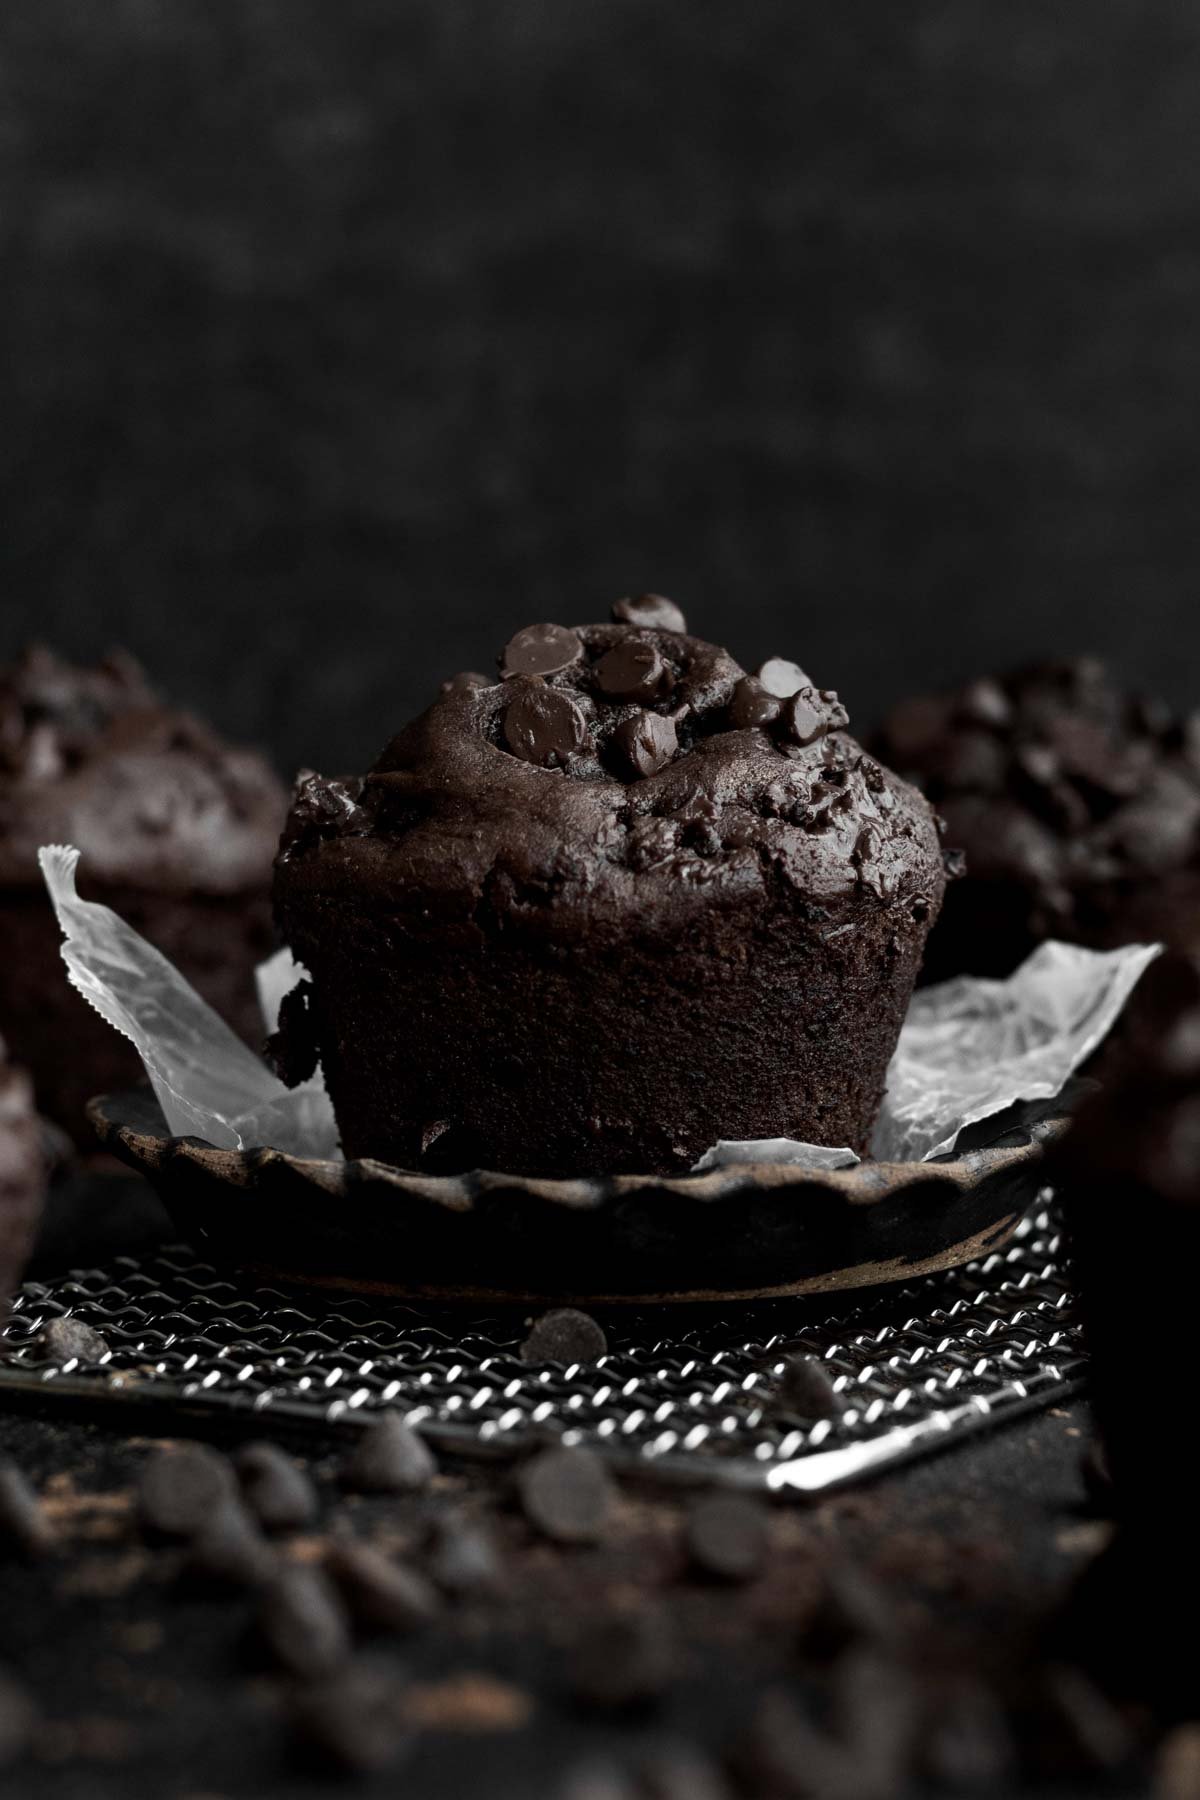 A proud chocolate muffin standing in the darkness.